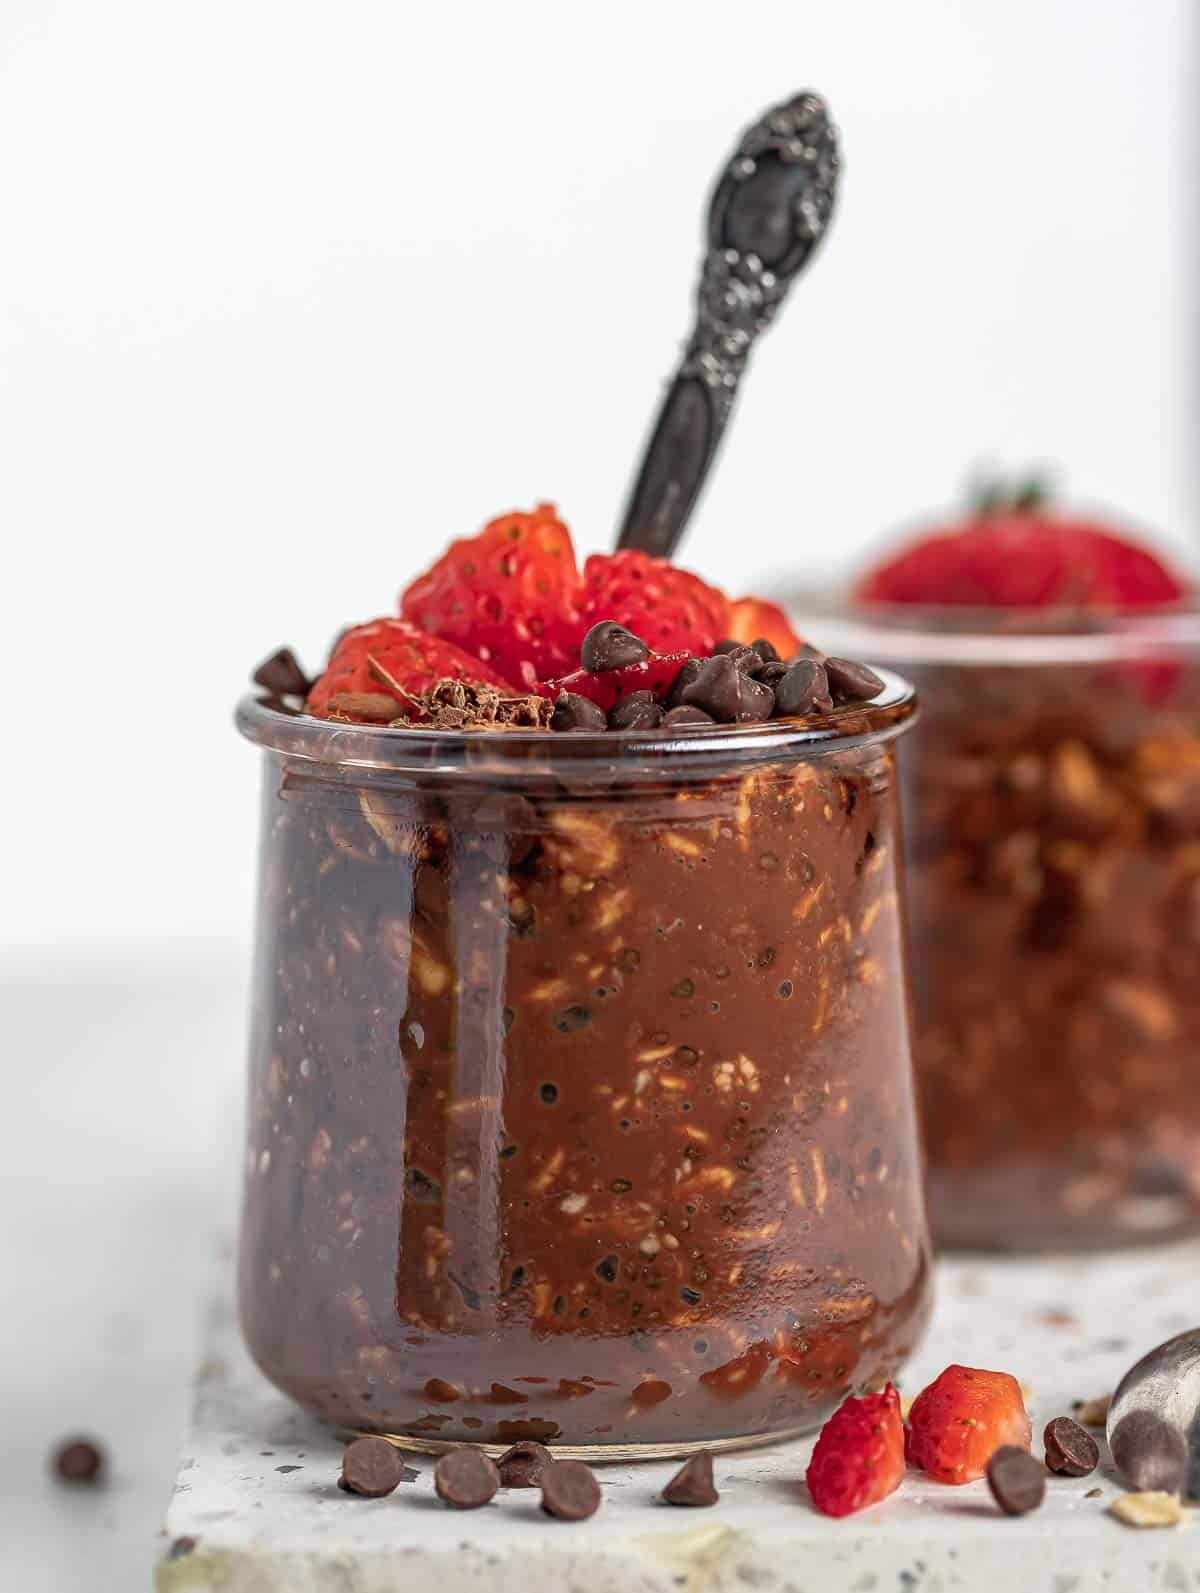 front close up view of the chocolate overnight oats in a cup